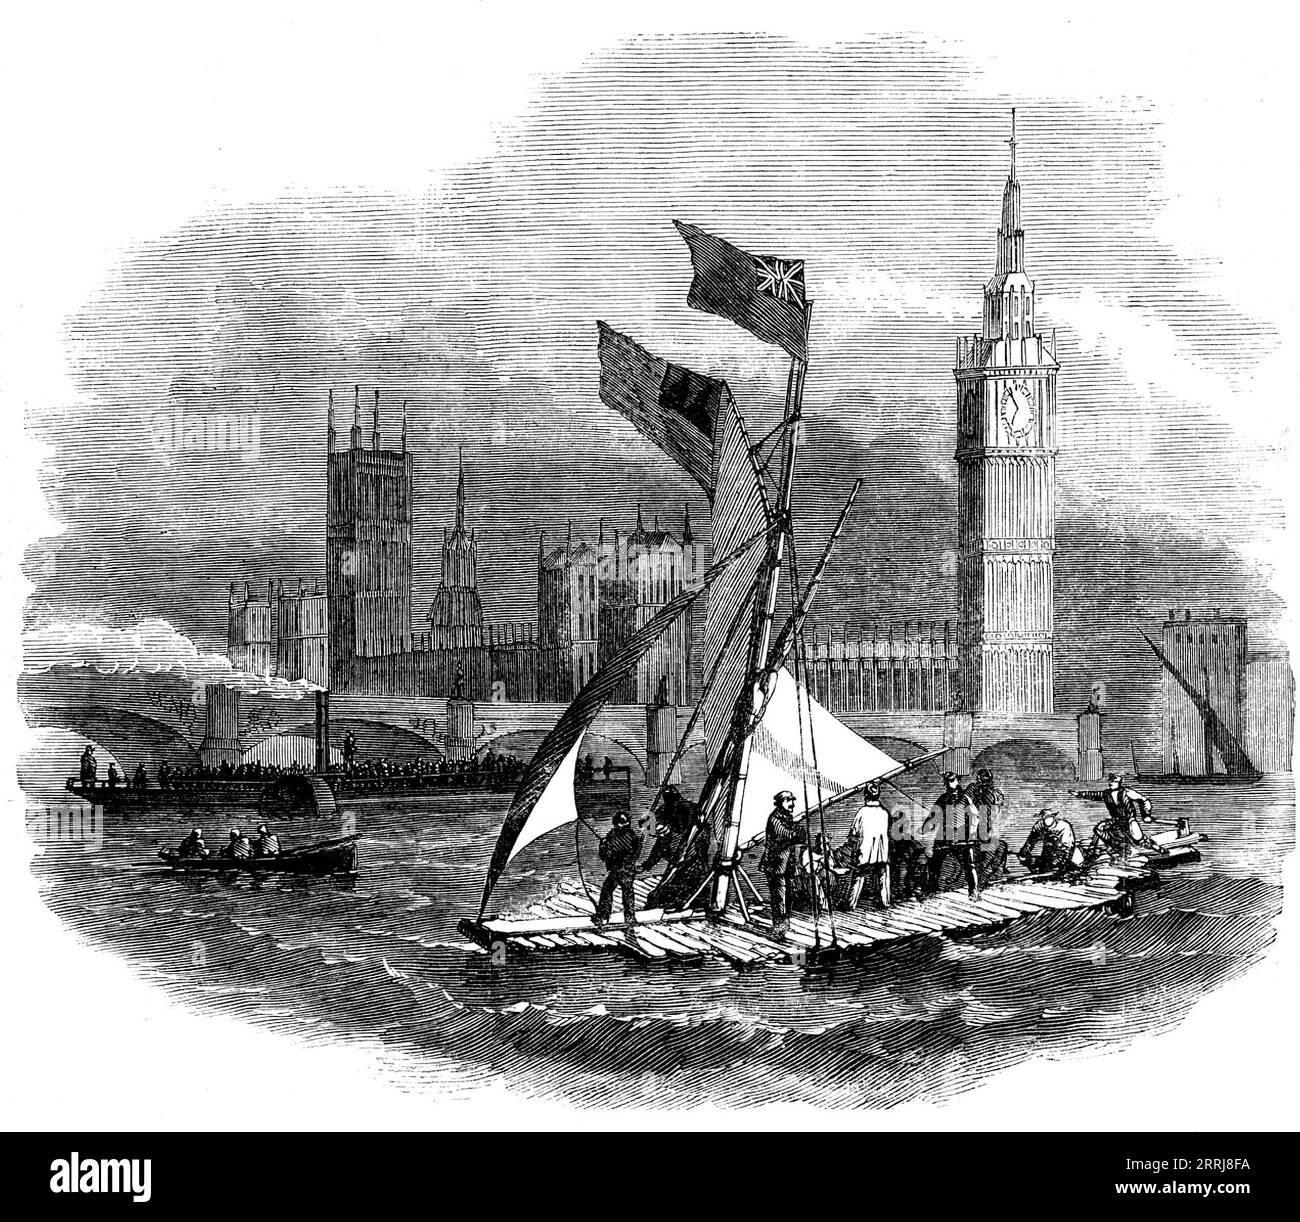 Captain Urquhart experimenting with his Life-Preserving Raft on the Thames, [in London] 1858. 'A craft, attracting attention by its singular appearance, has been lately experimented on by the inventor, Captain W. Urquhart, of New York, on the Thames. This new life-preserving apparatus is composed of [nineteen] mattresses connected in such a manner as to form a raft. These mattresses are intended at the same time as beds for the crew and passengers. Each of them is composed of an impervious envelope of gutta-percha, containing another, of common canvas, filled with cork shavings...A valve place Stock Photo